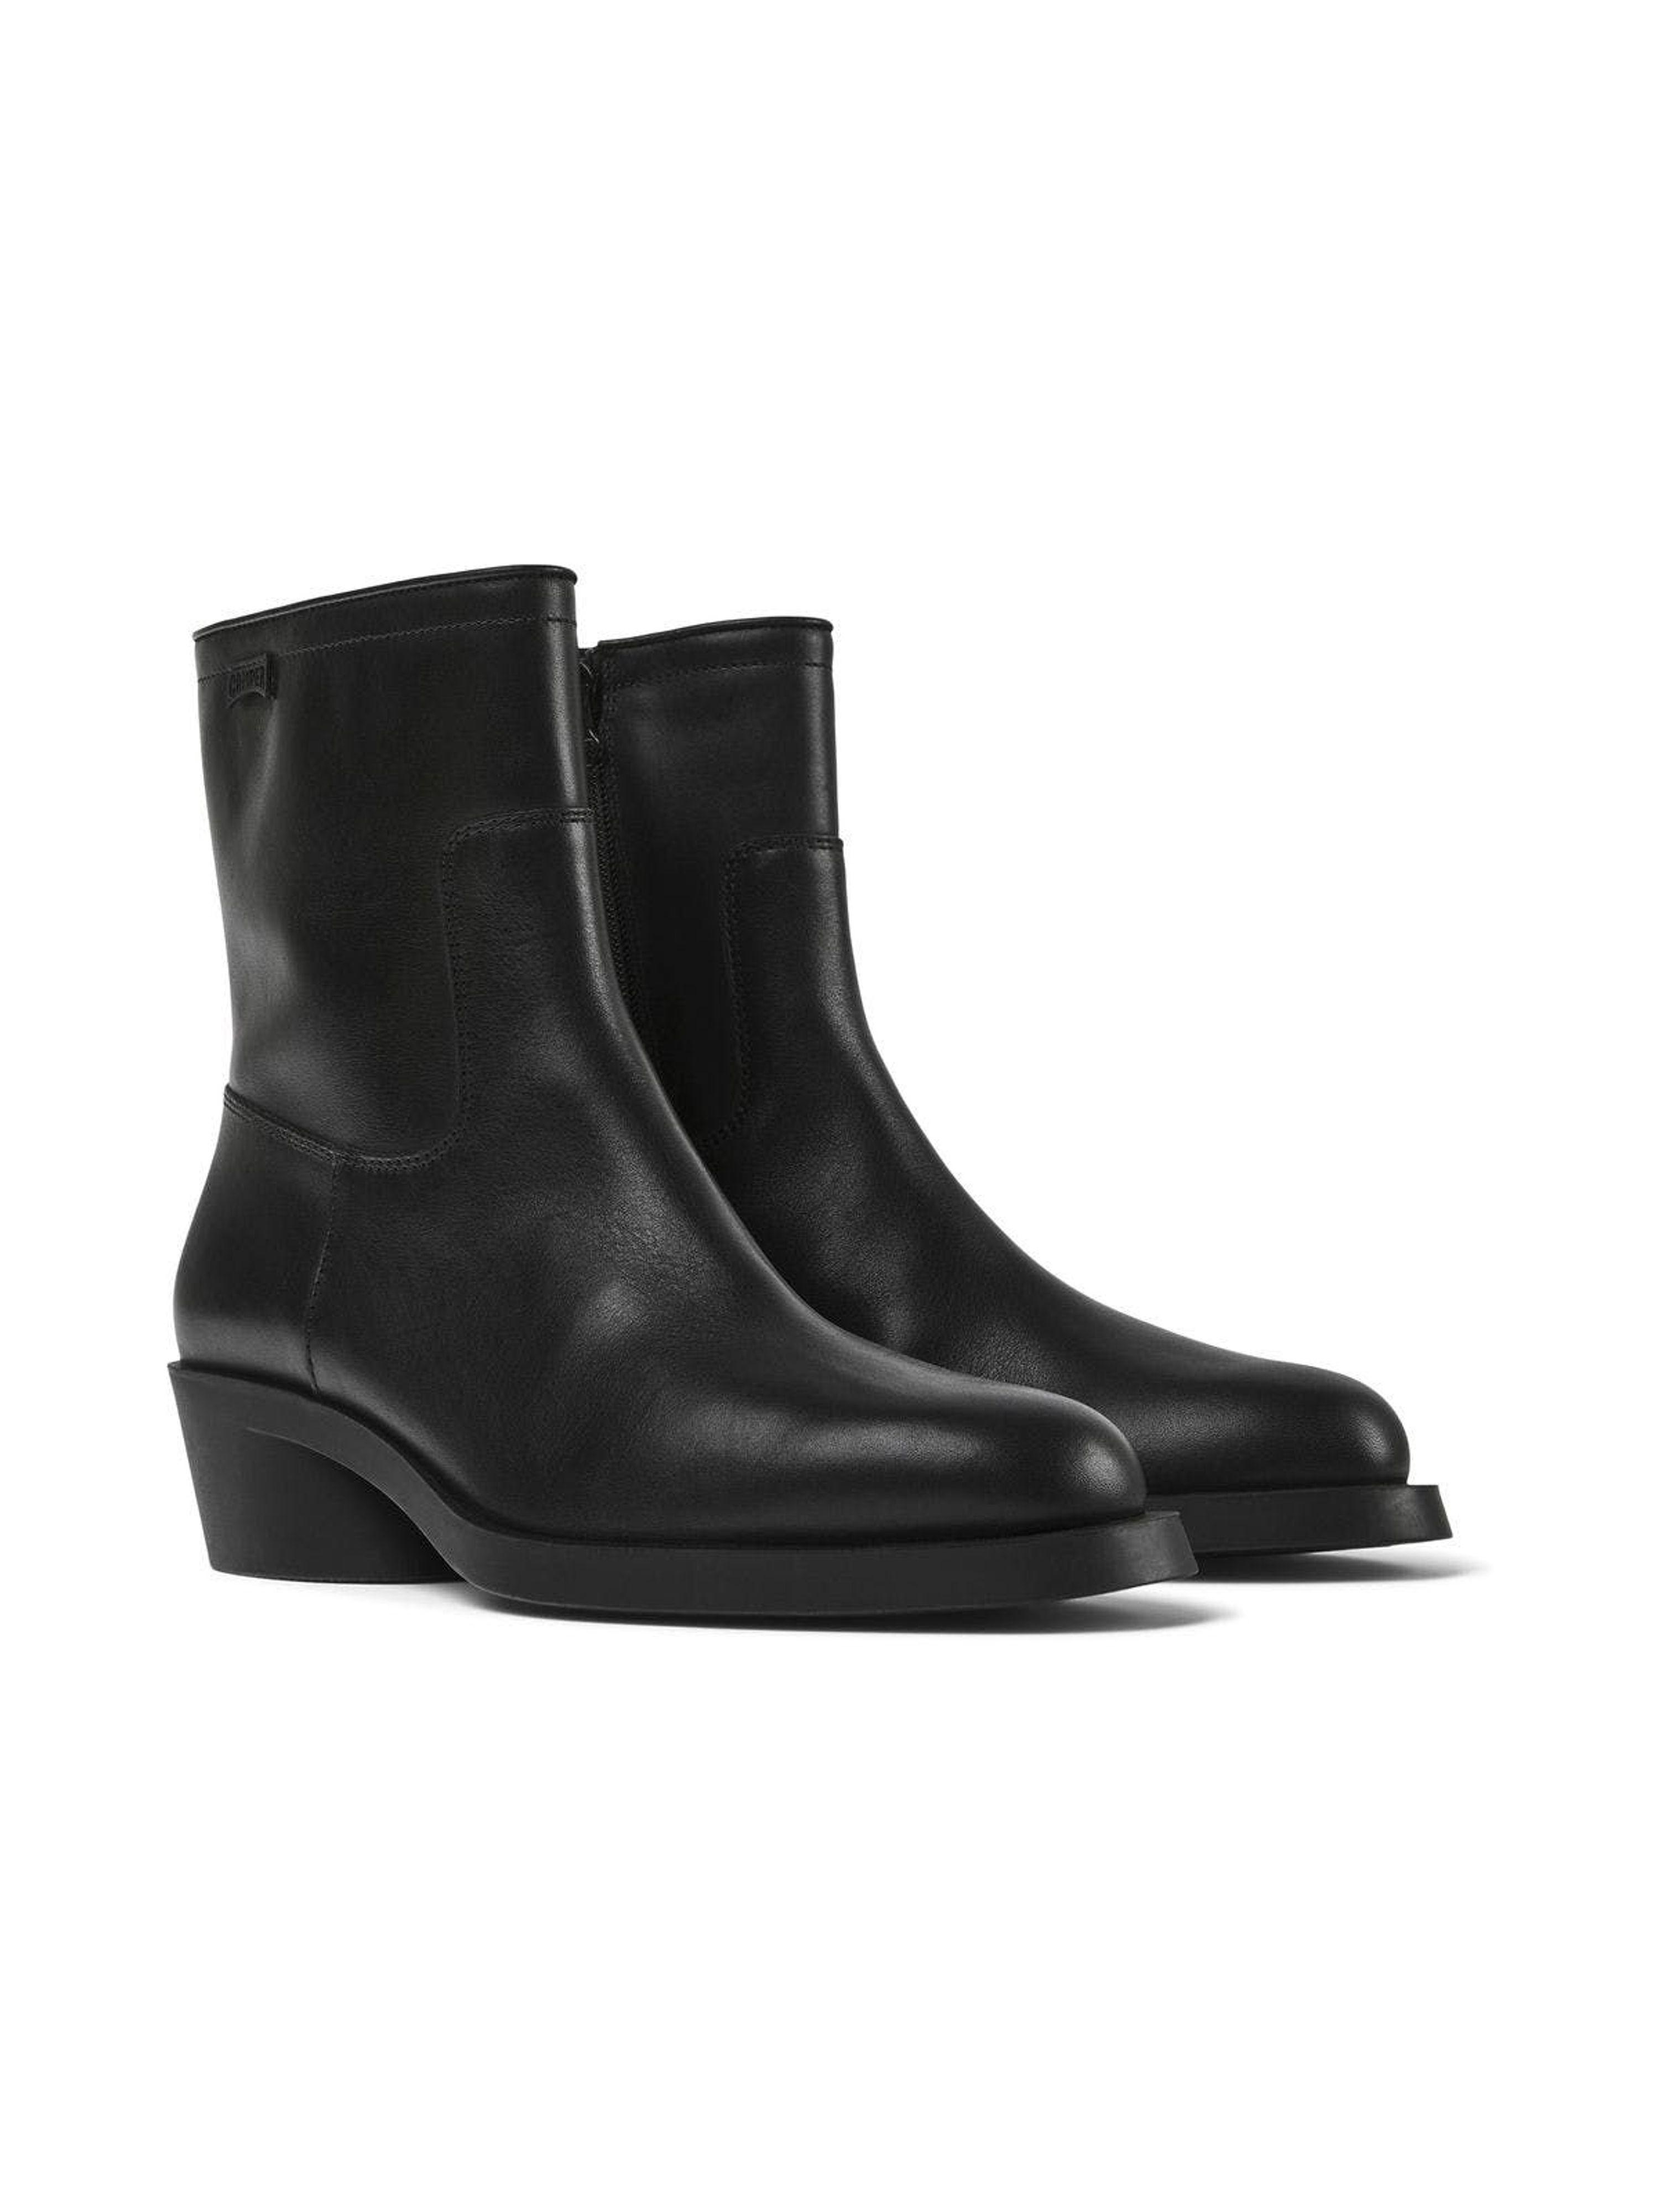 Camper Black Leather Bonnie Boots | Lyst